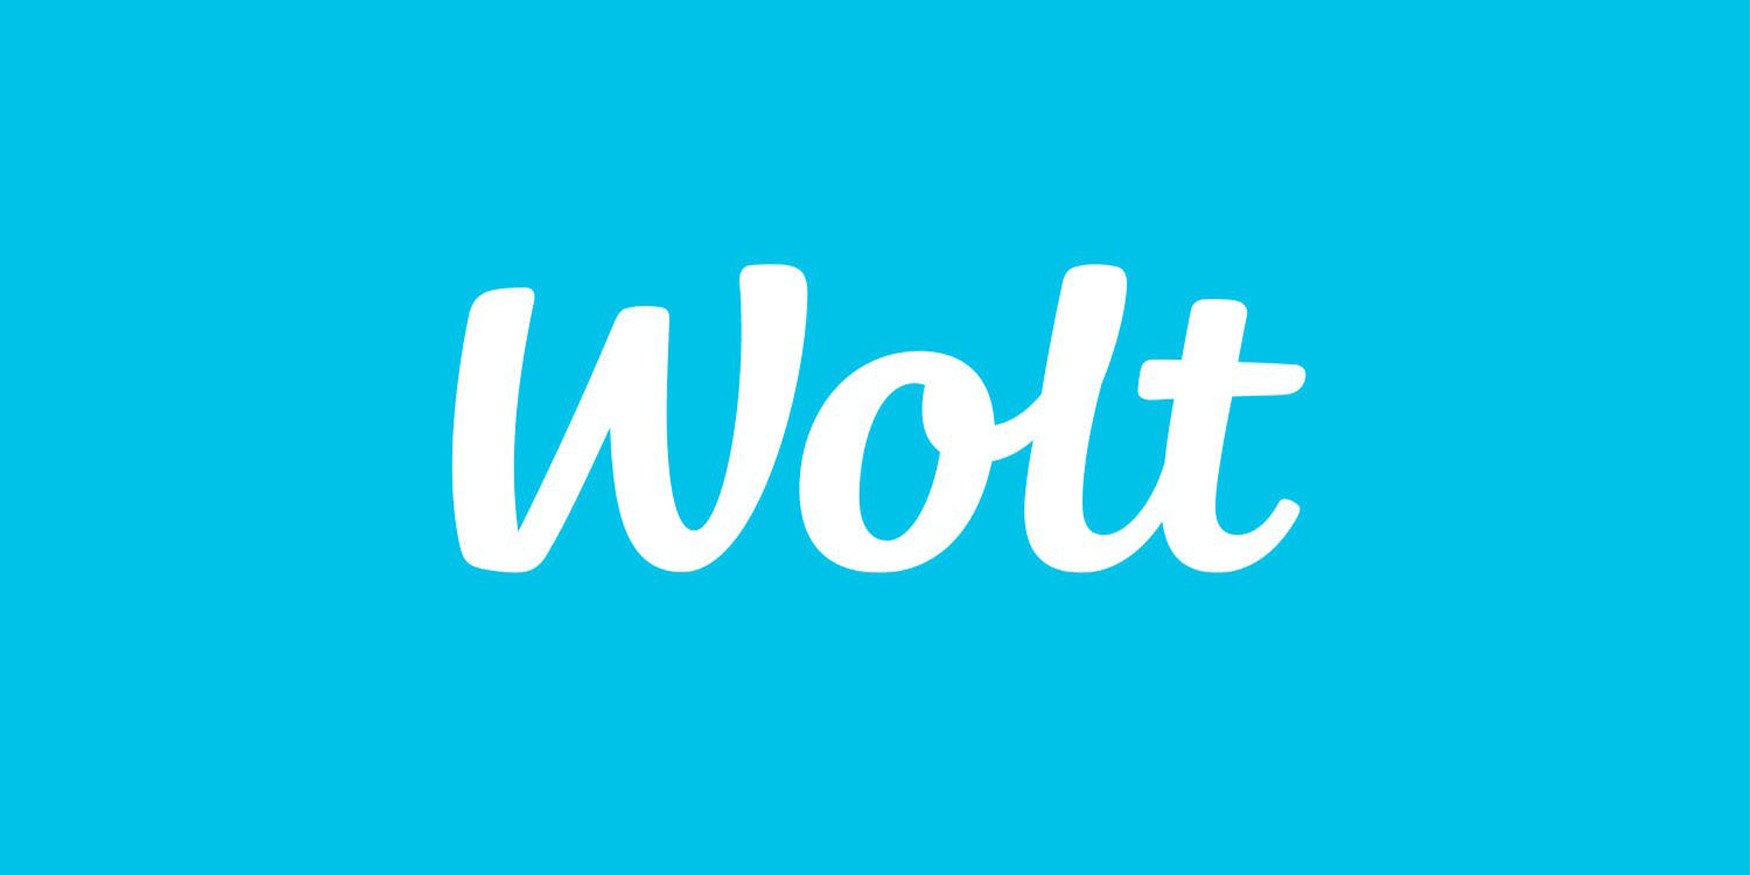  Wolt's white logo on a blue background